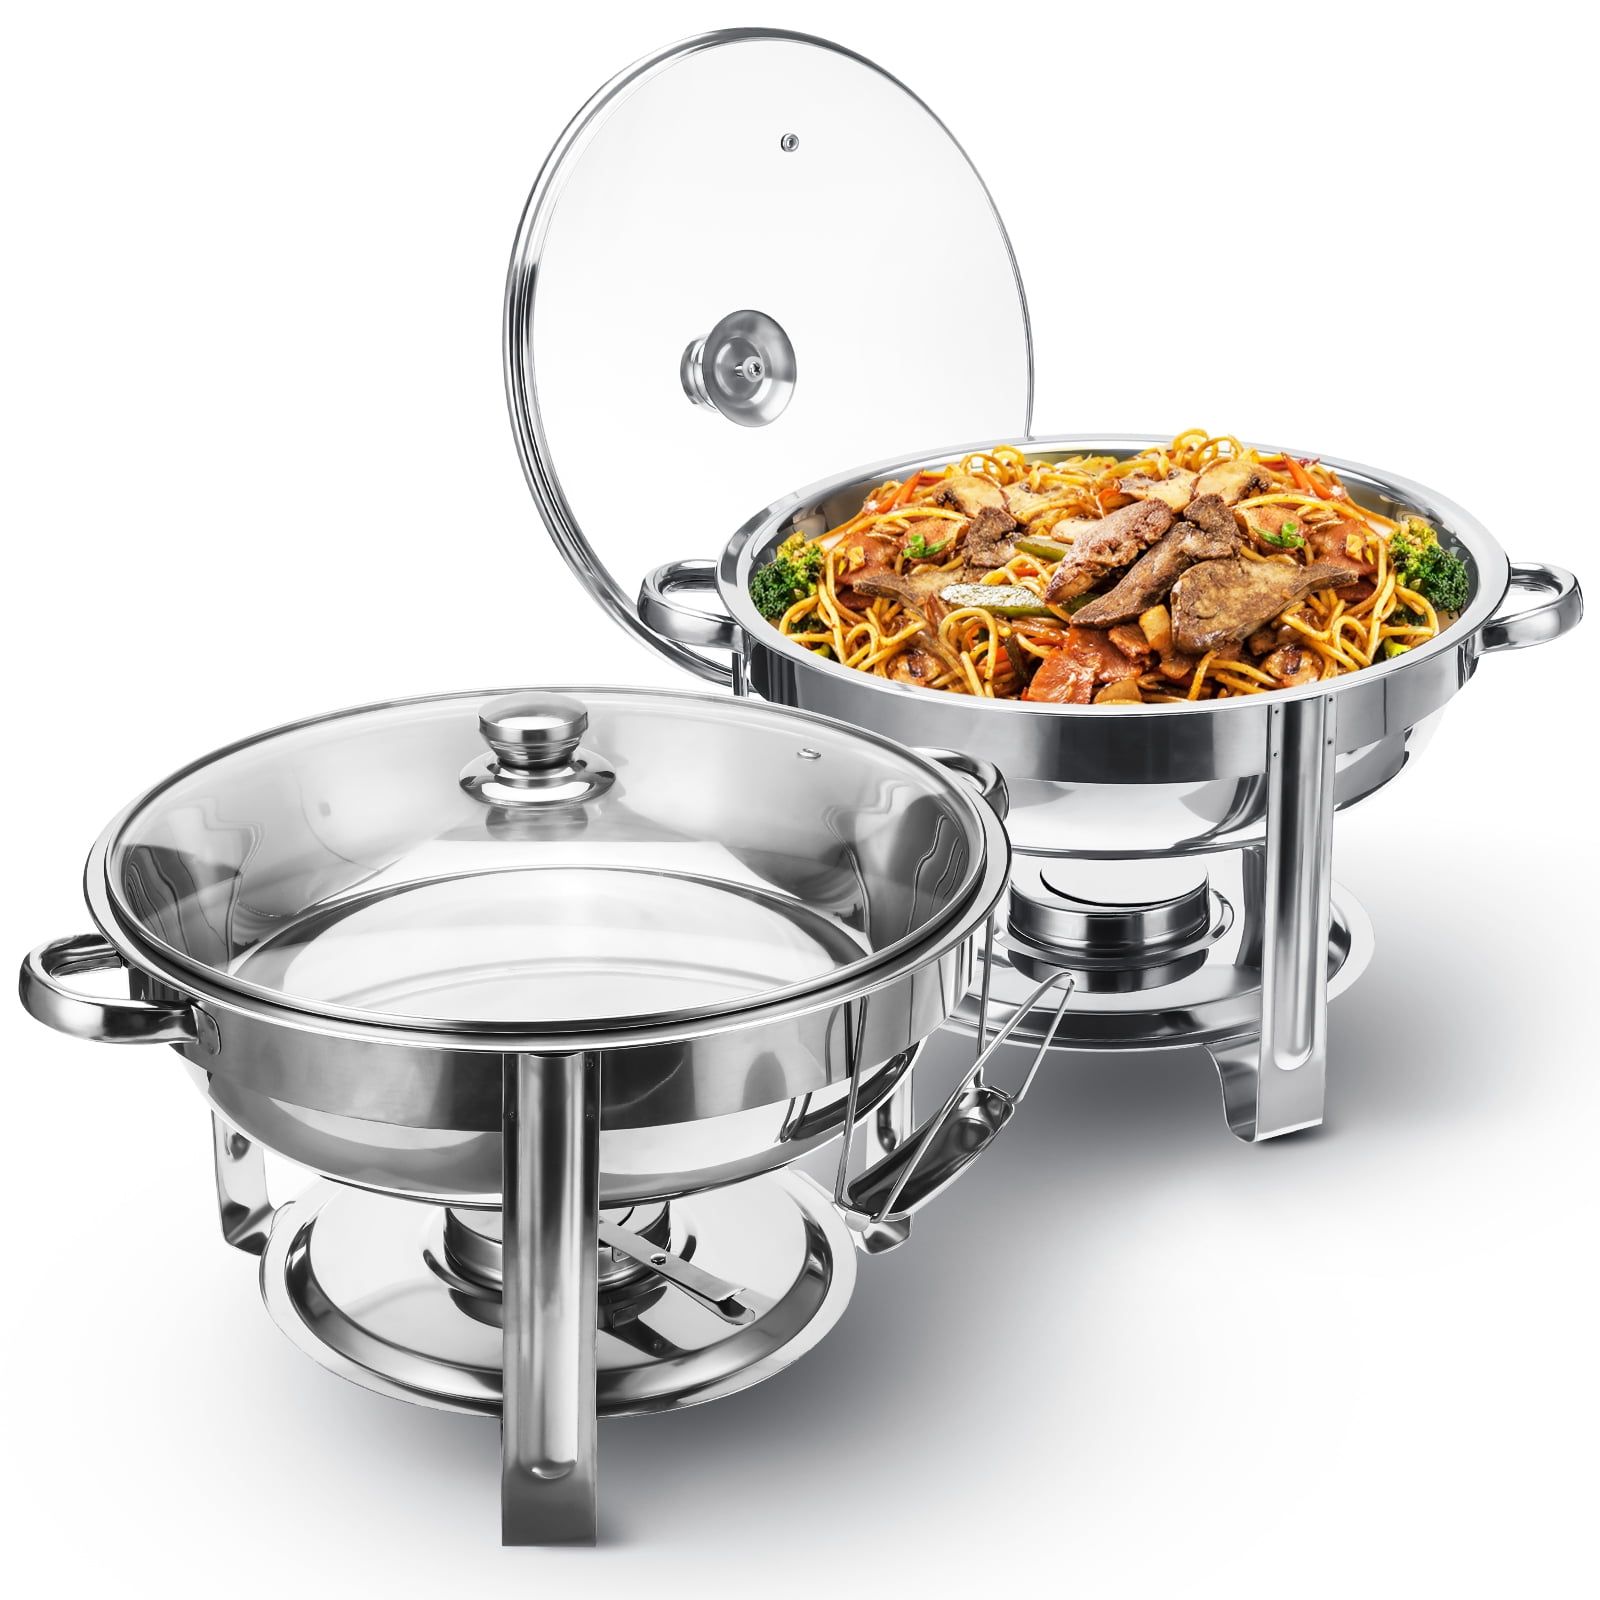 2 8Qt Chafing Dish Buffet Chafer With Hinged Dome S/Steel Food Warmer 2 Aprons 